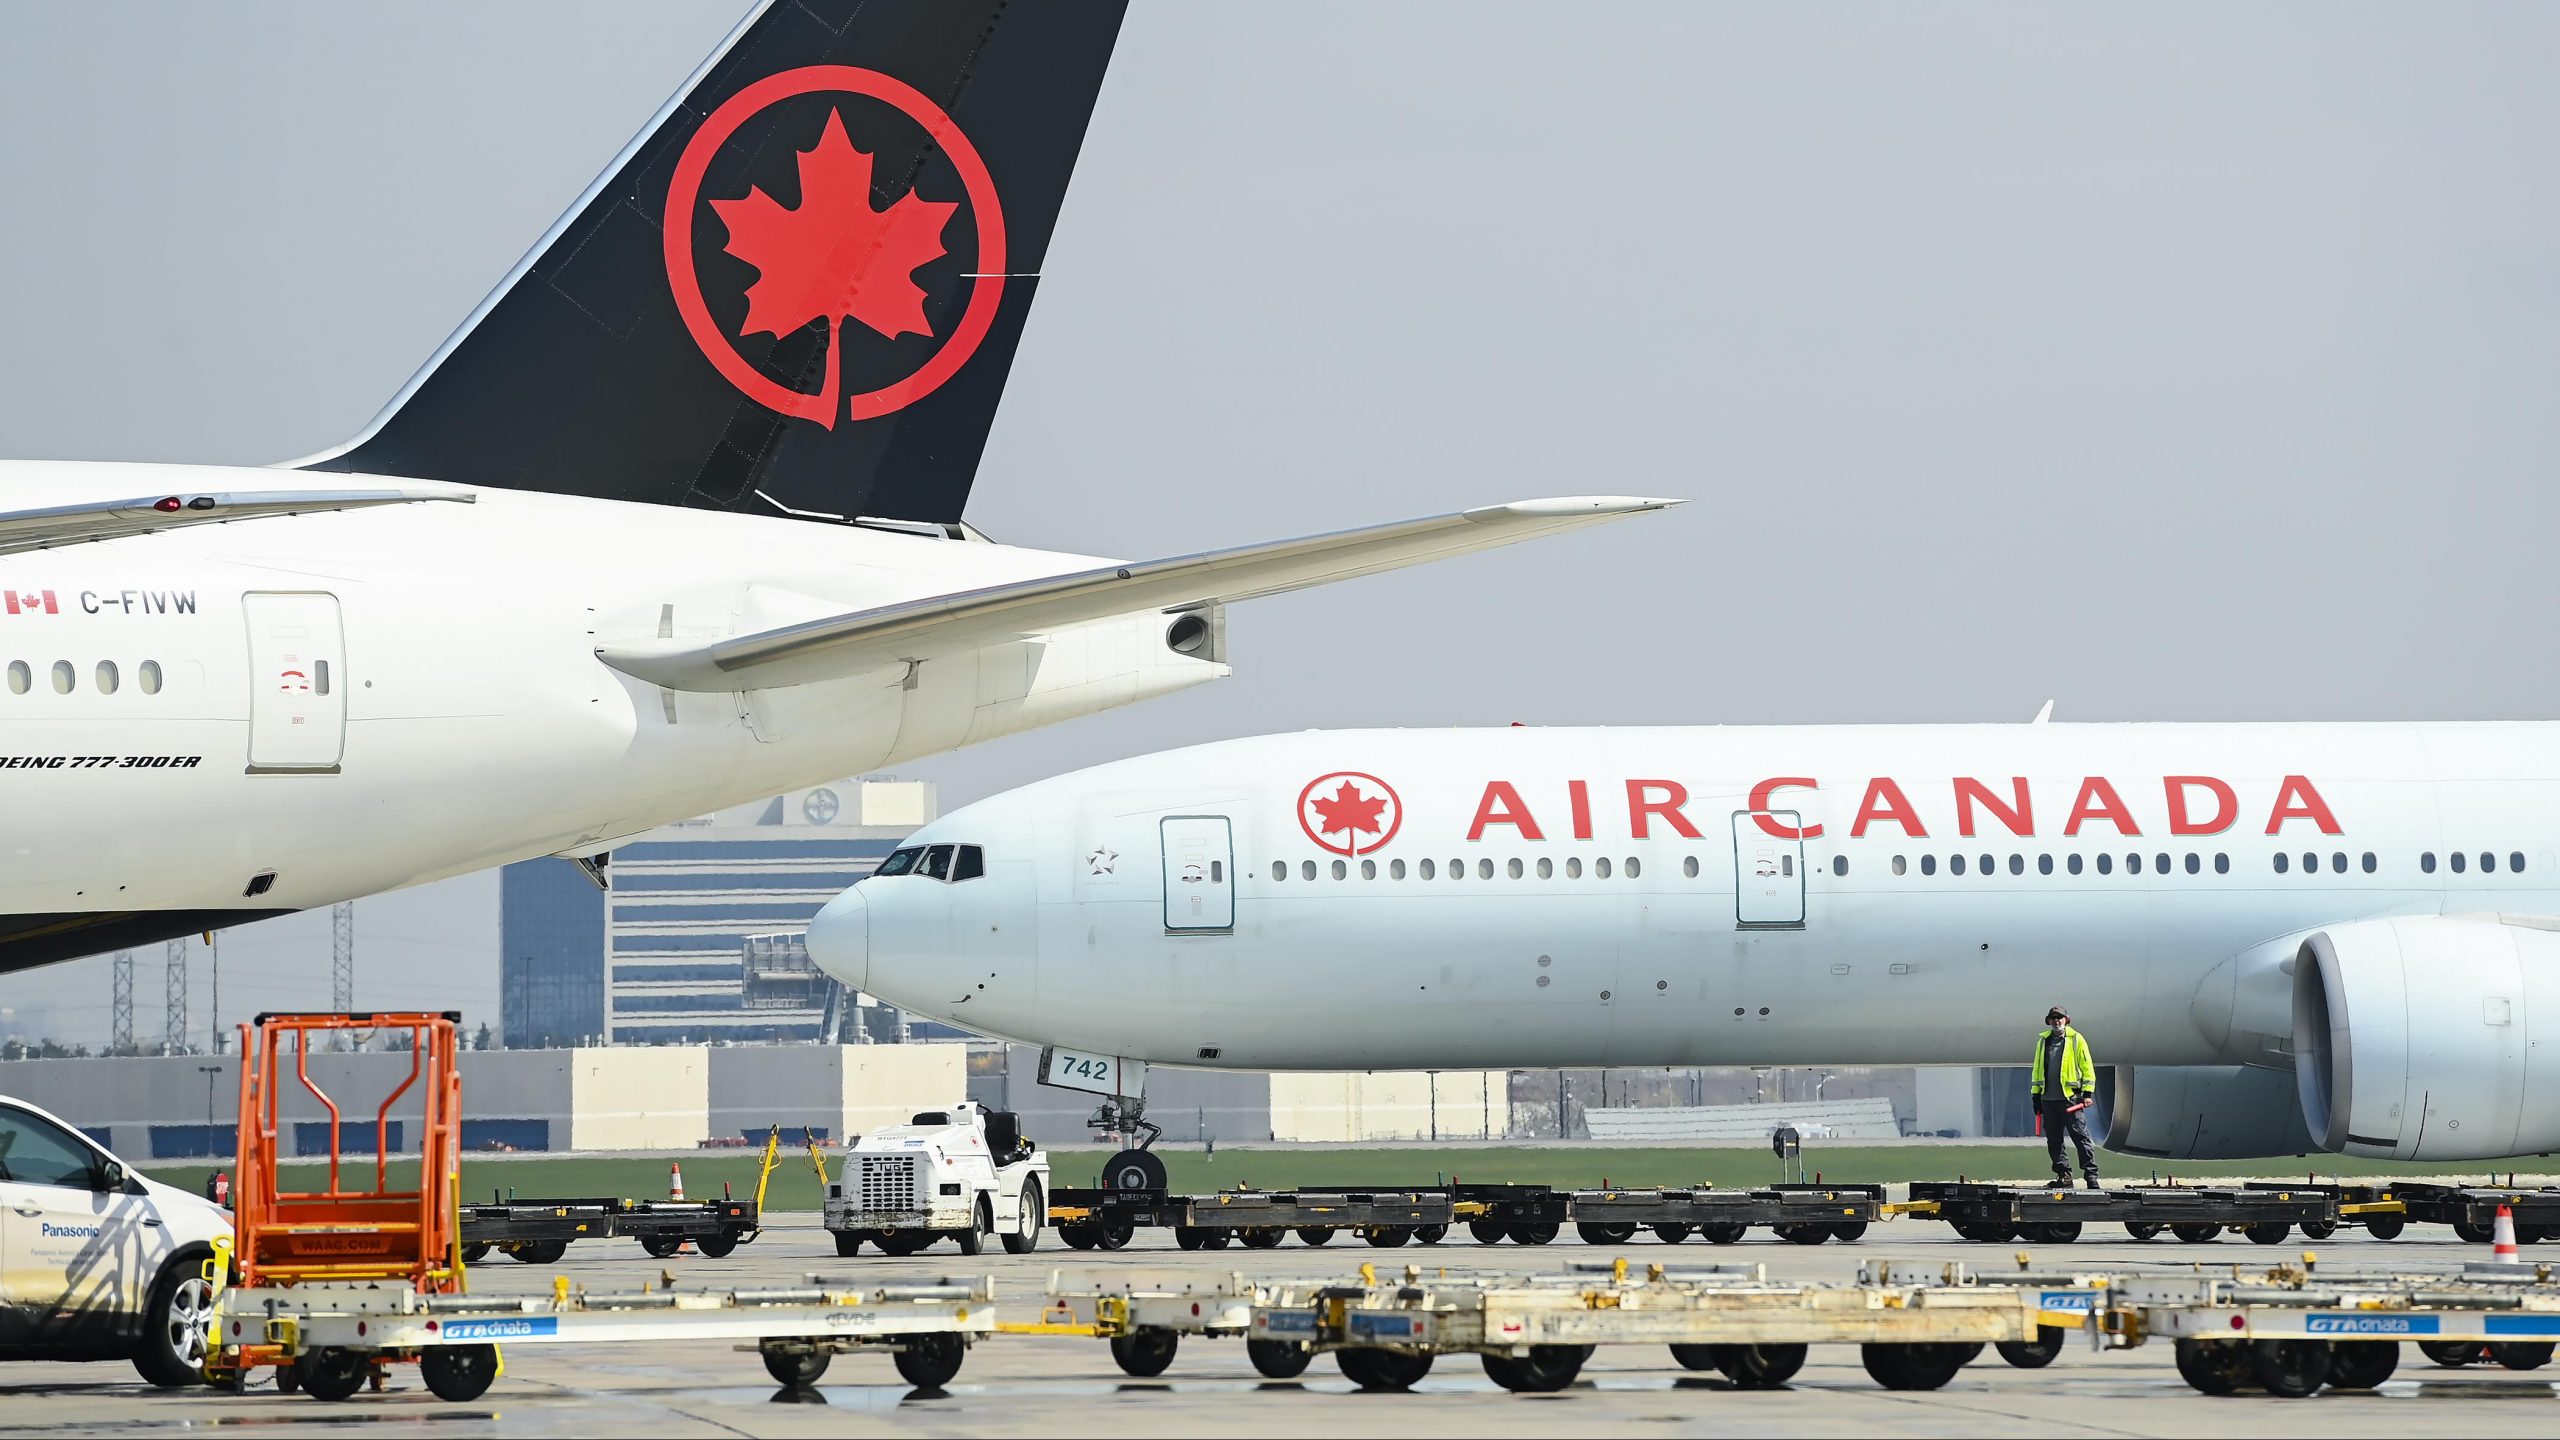 These bonuses from the top executives of Air Canada irritate you

